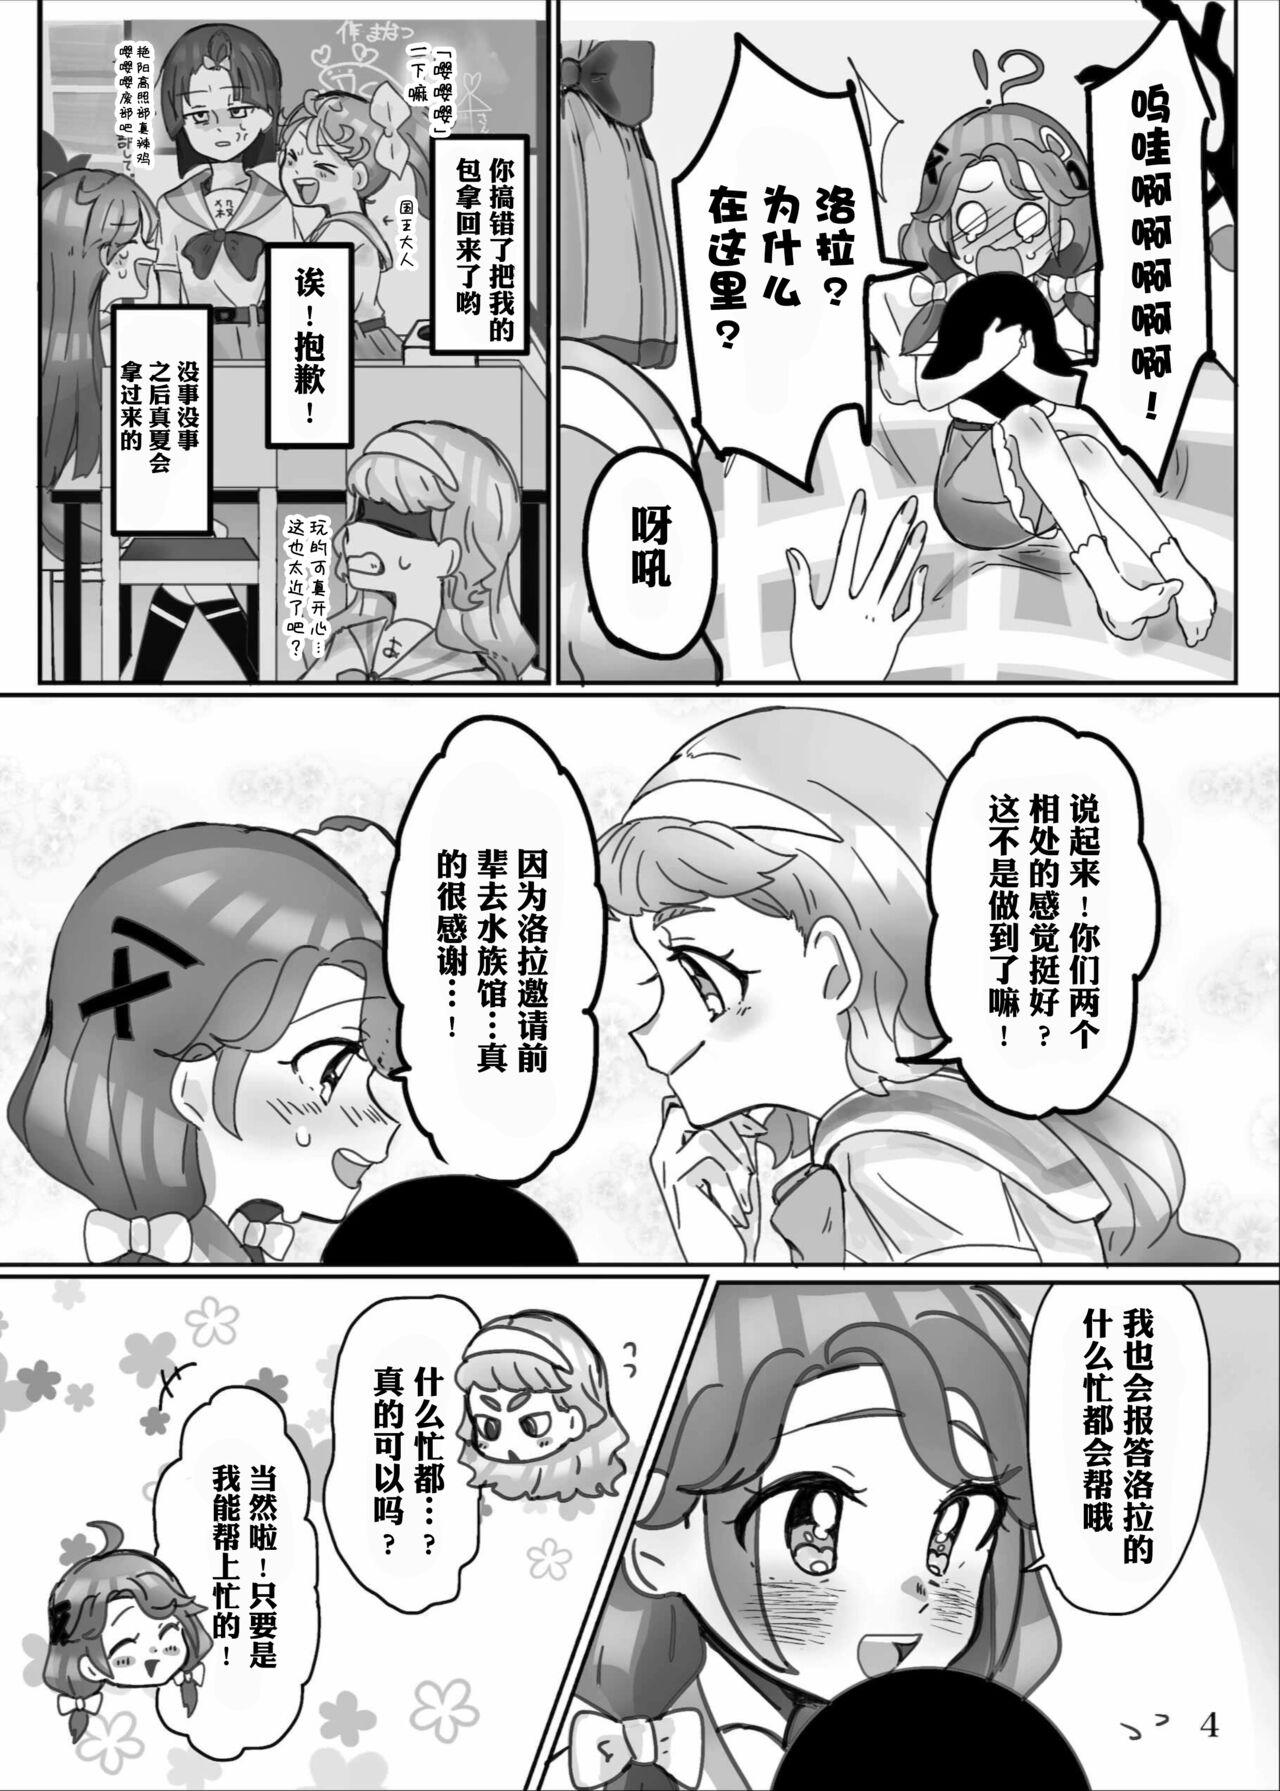 Van yaritaigotone do my best - Pretty cure Tropical rouge precure Cruising - Page 6